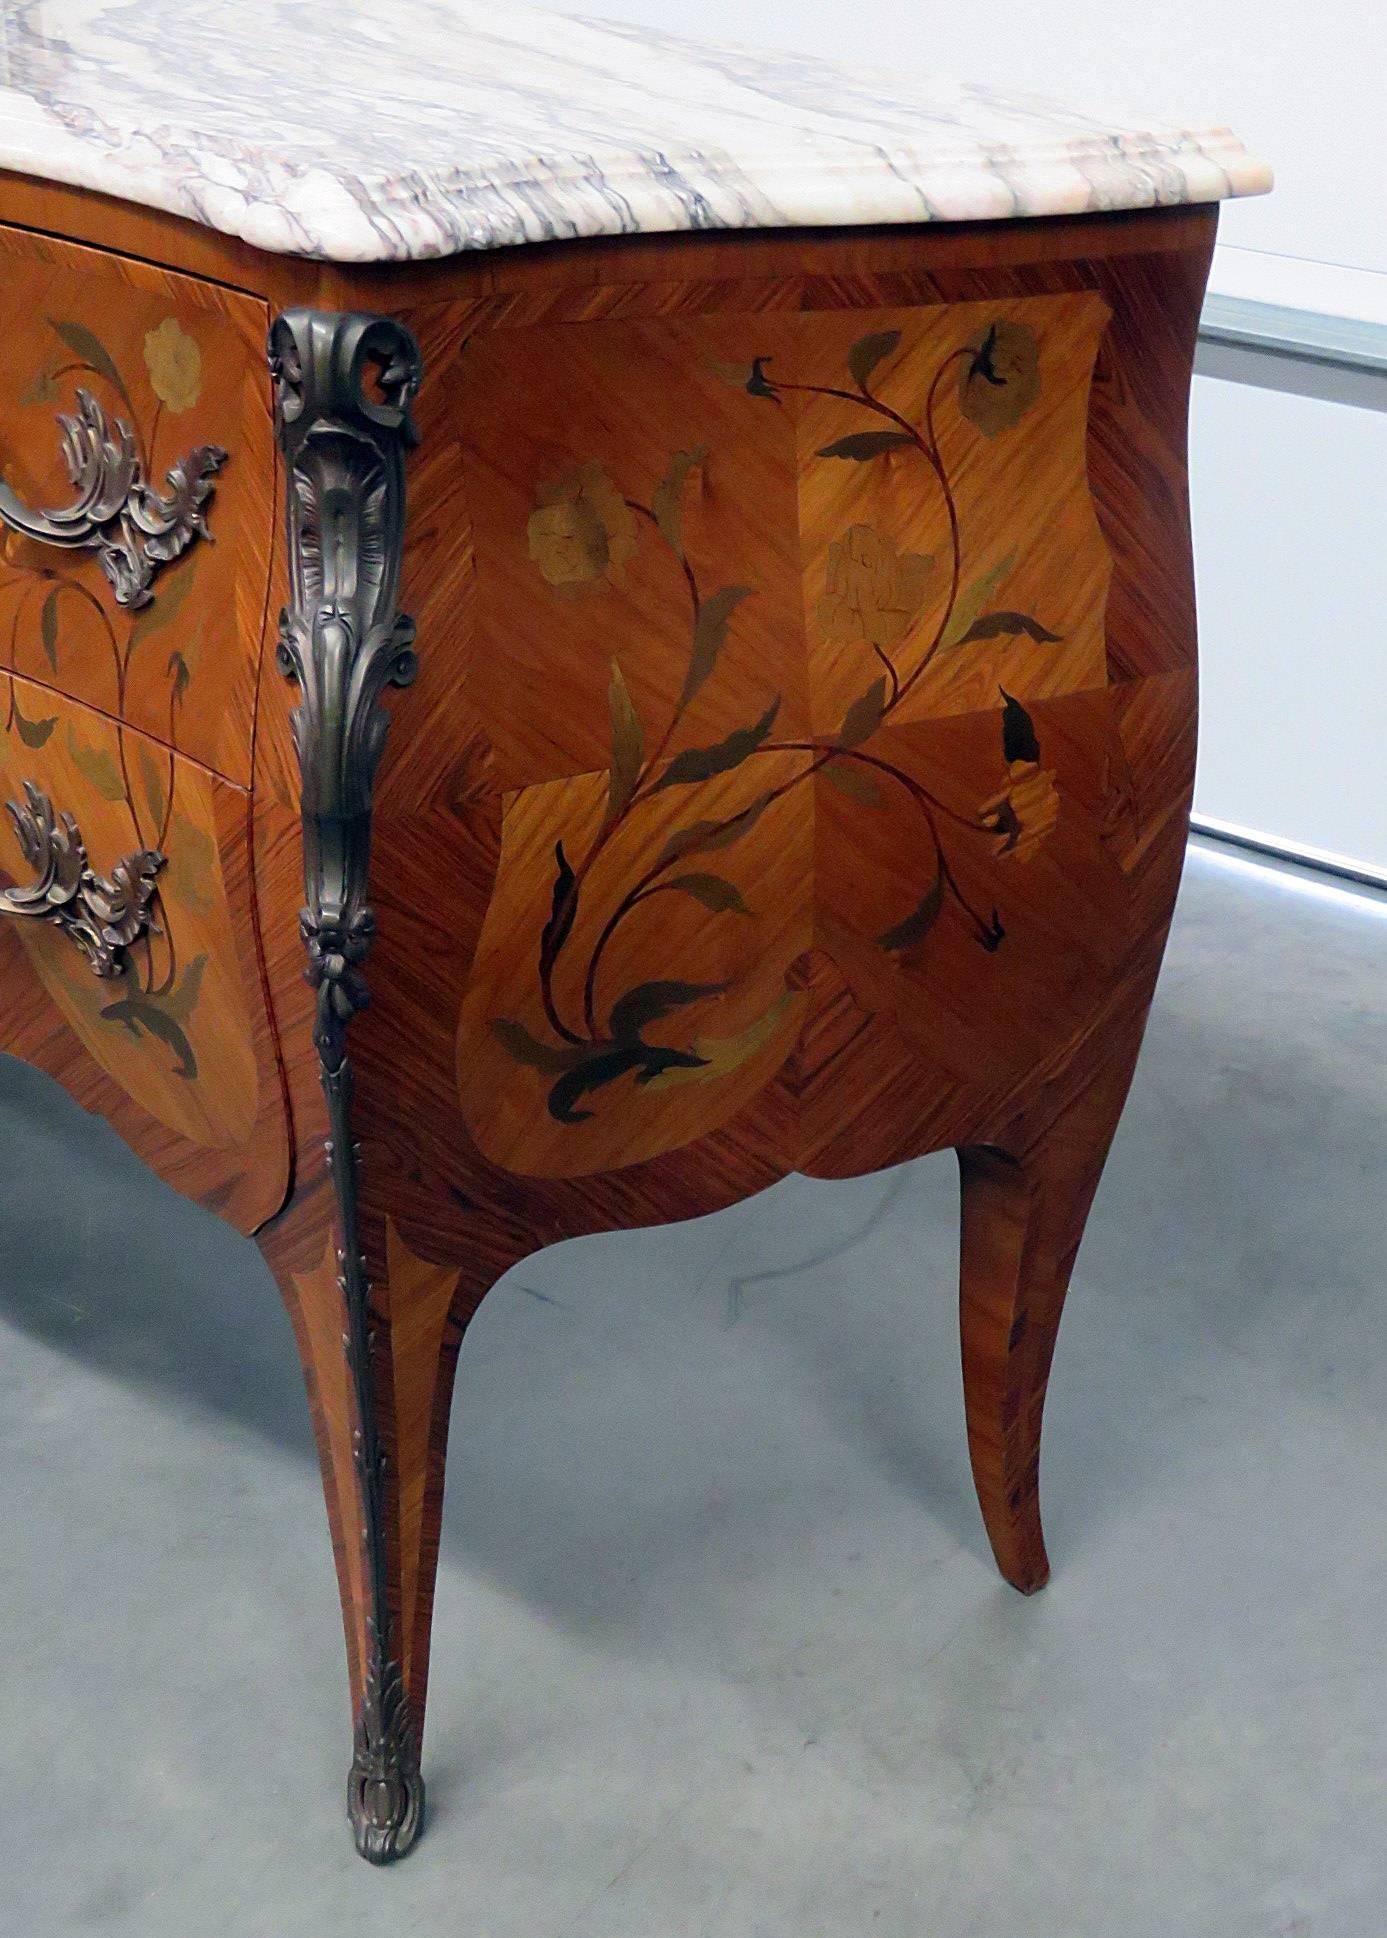 Inlaid marble-top commode with two drawers and bronze accents.